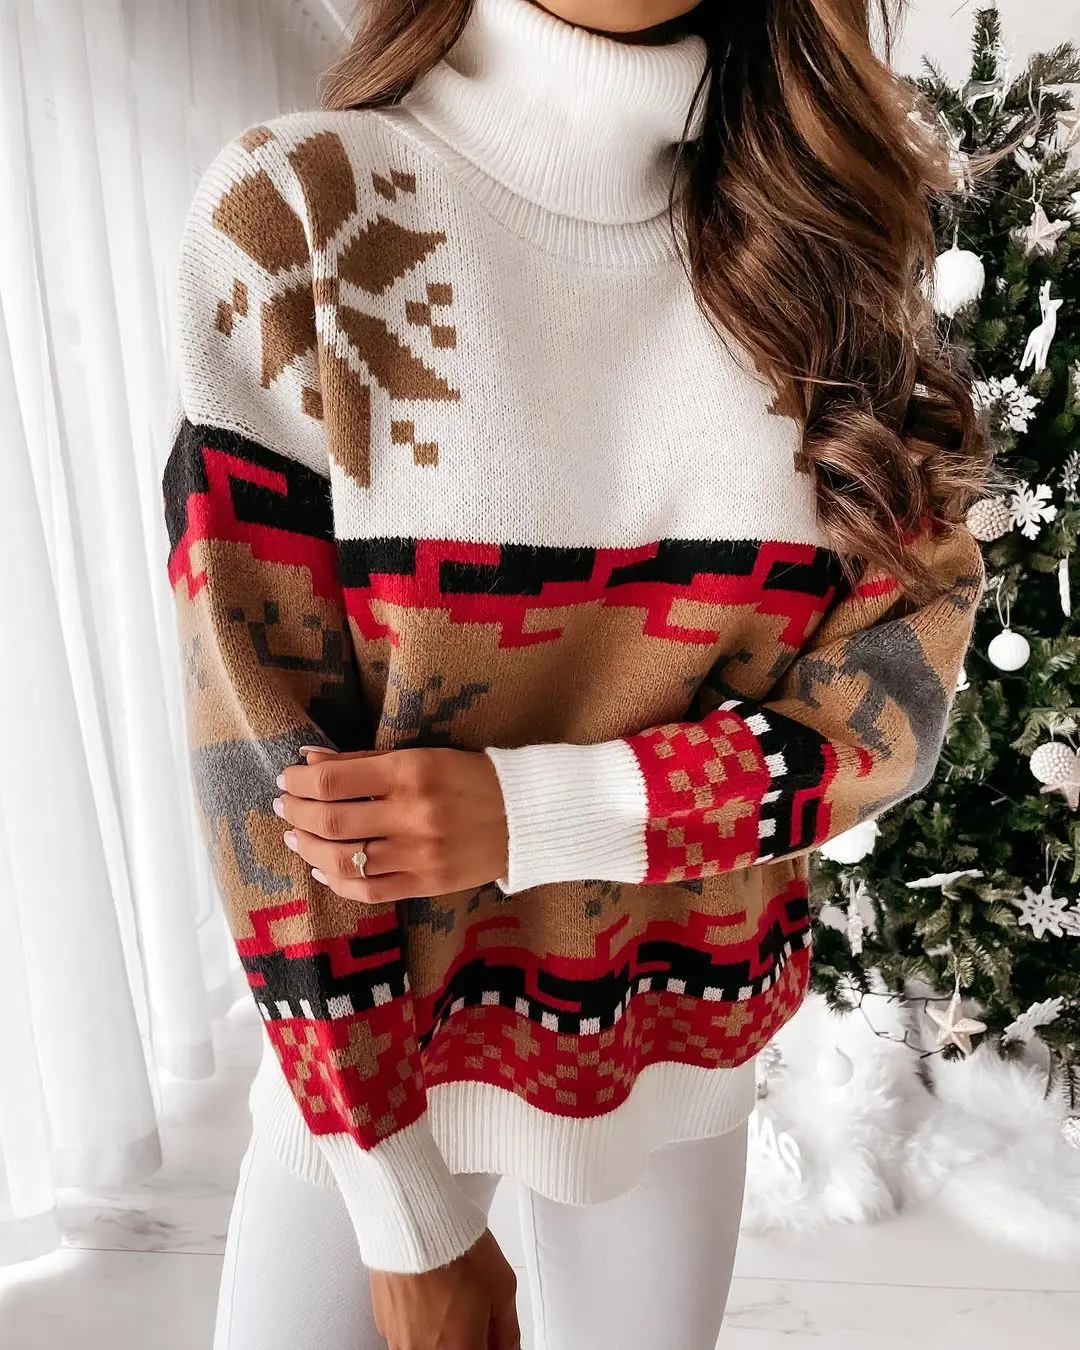 cardigan Women's Christmas Sweaters Fall Winter Warm Knitted Printing Turtleneck Long Sleeve Pullover Top Streetwear Xmas Gift 2022 striped sweater